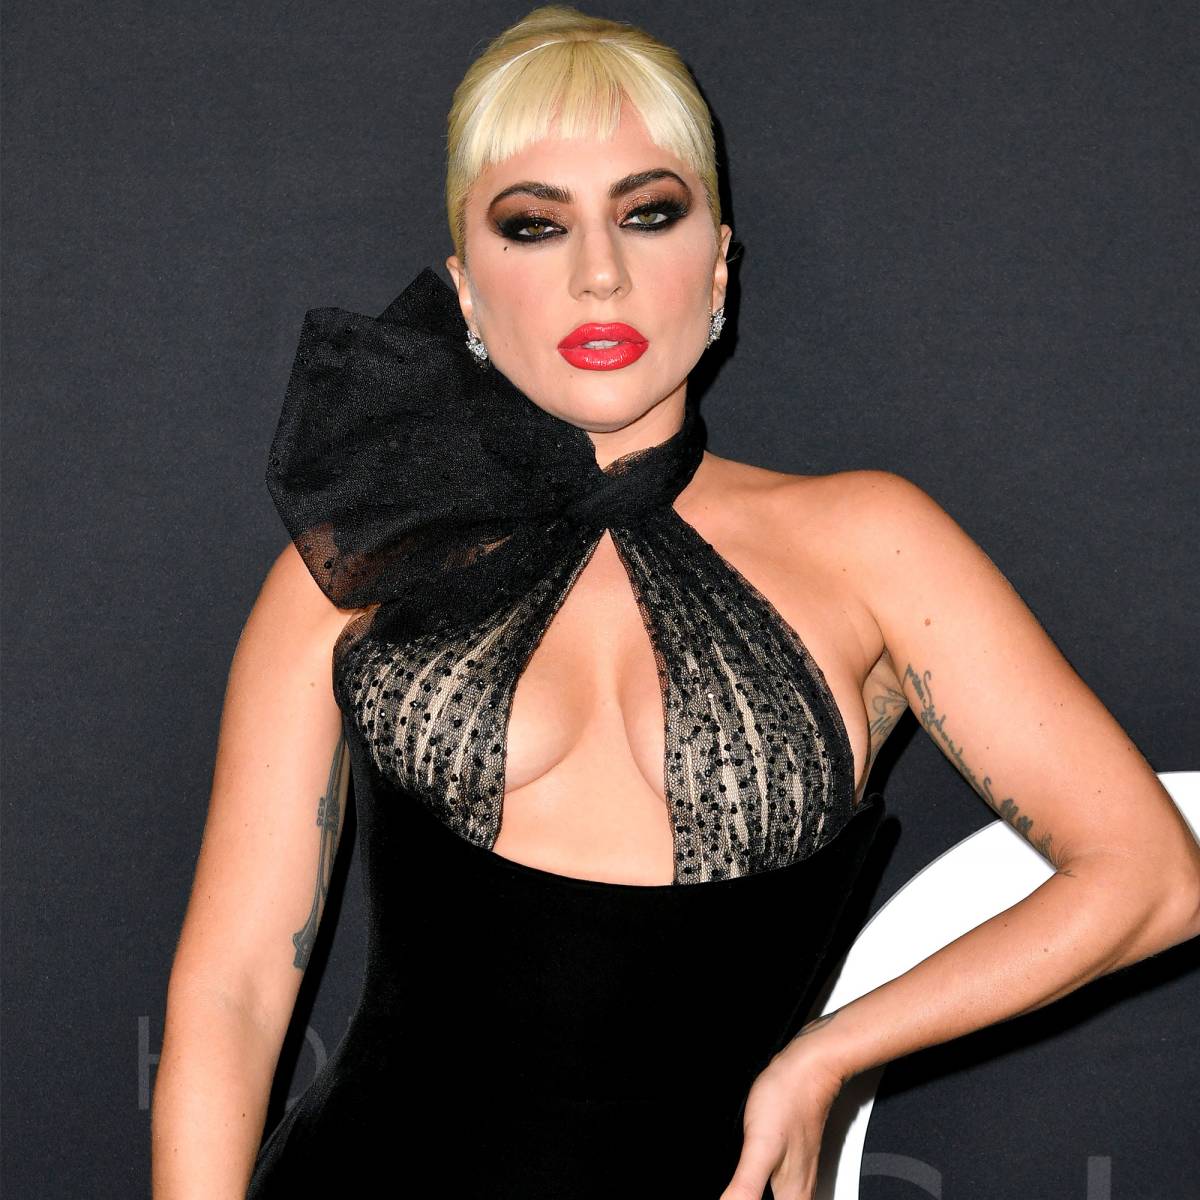 Lady Gaga and 'House of Gucci Cast' Stun at NYC Premiere: Pics